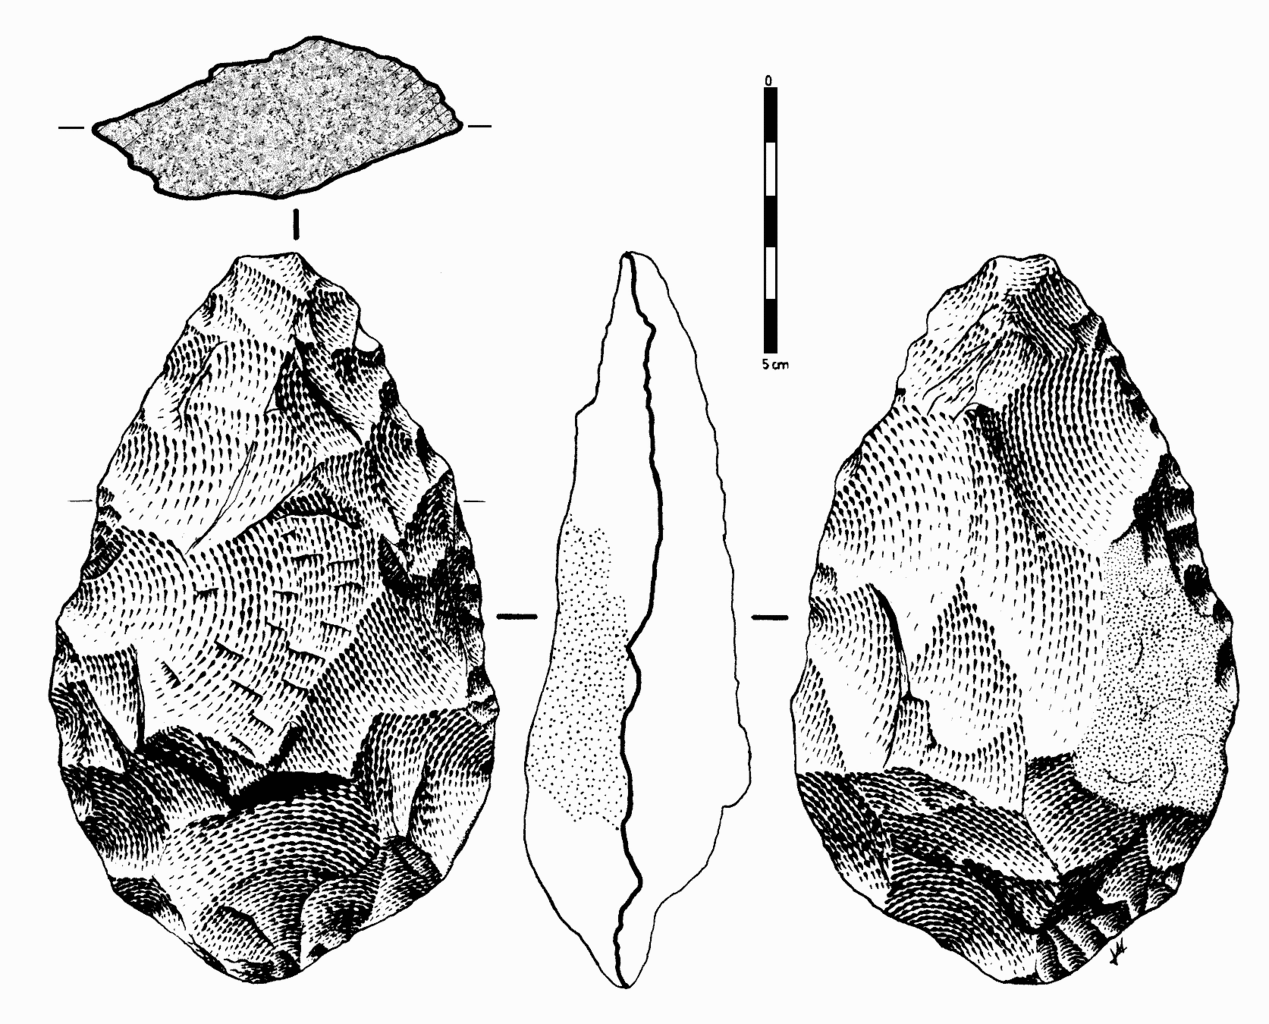 Front, back, side, and top views of oval-shaped stone core with chunks removed.